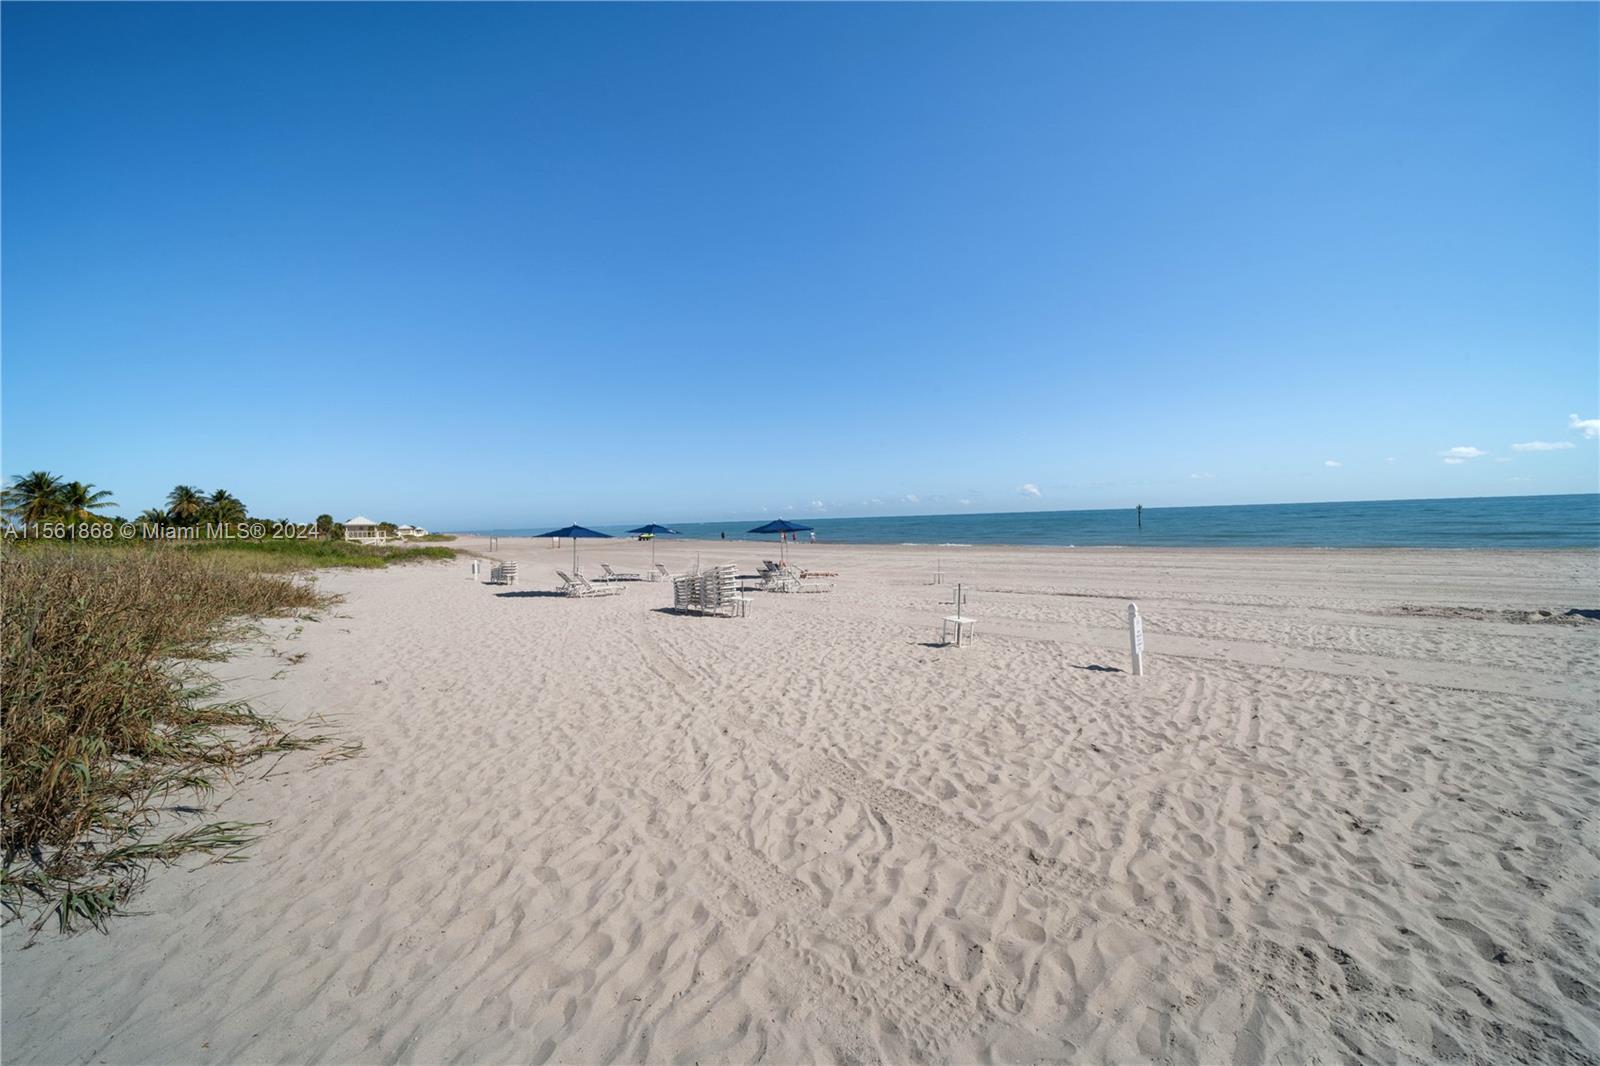 ENJOY A BEAUTIFUL LIFESTYLE AT KEY BISCAYNE!! COMPLETELY REMODELED UNIT AT THE COMMODORE CLUB WEST WITH OPEN VIEWS MIAMI SKYLINE, OCEAN AND KEYBISCAYNE RESERVE. 1BD/1.5BA, HIGH IMPACT WINDOWS, LOTS OF NATURAL LIGHT, STAINLESS STEEL APPLIANCES, GRANITE COUNTERTOPS, MARBLE BATHS, SPACIOUS BEDROOM WITH WALK-IN CLOSETS, PRIVATE BALCONY, 1 PARKING SPACE ASSIGNED AND MUCH MORE. BEACHFRONT ACCESS AND ALL AMENITIES. FOR MORE INFORMATION CONTACT LISTING AGENT. NOT SUBJECT TO APPRAISAL.